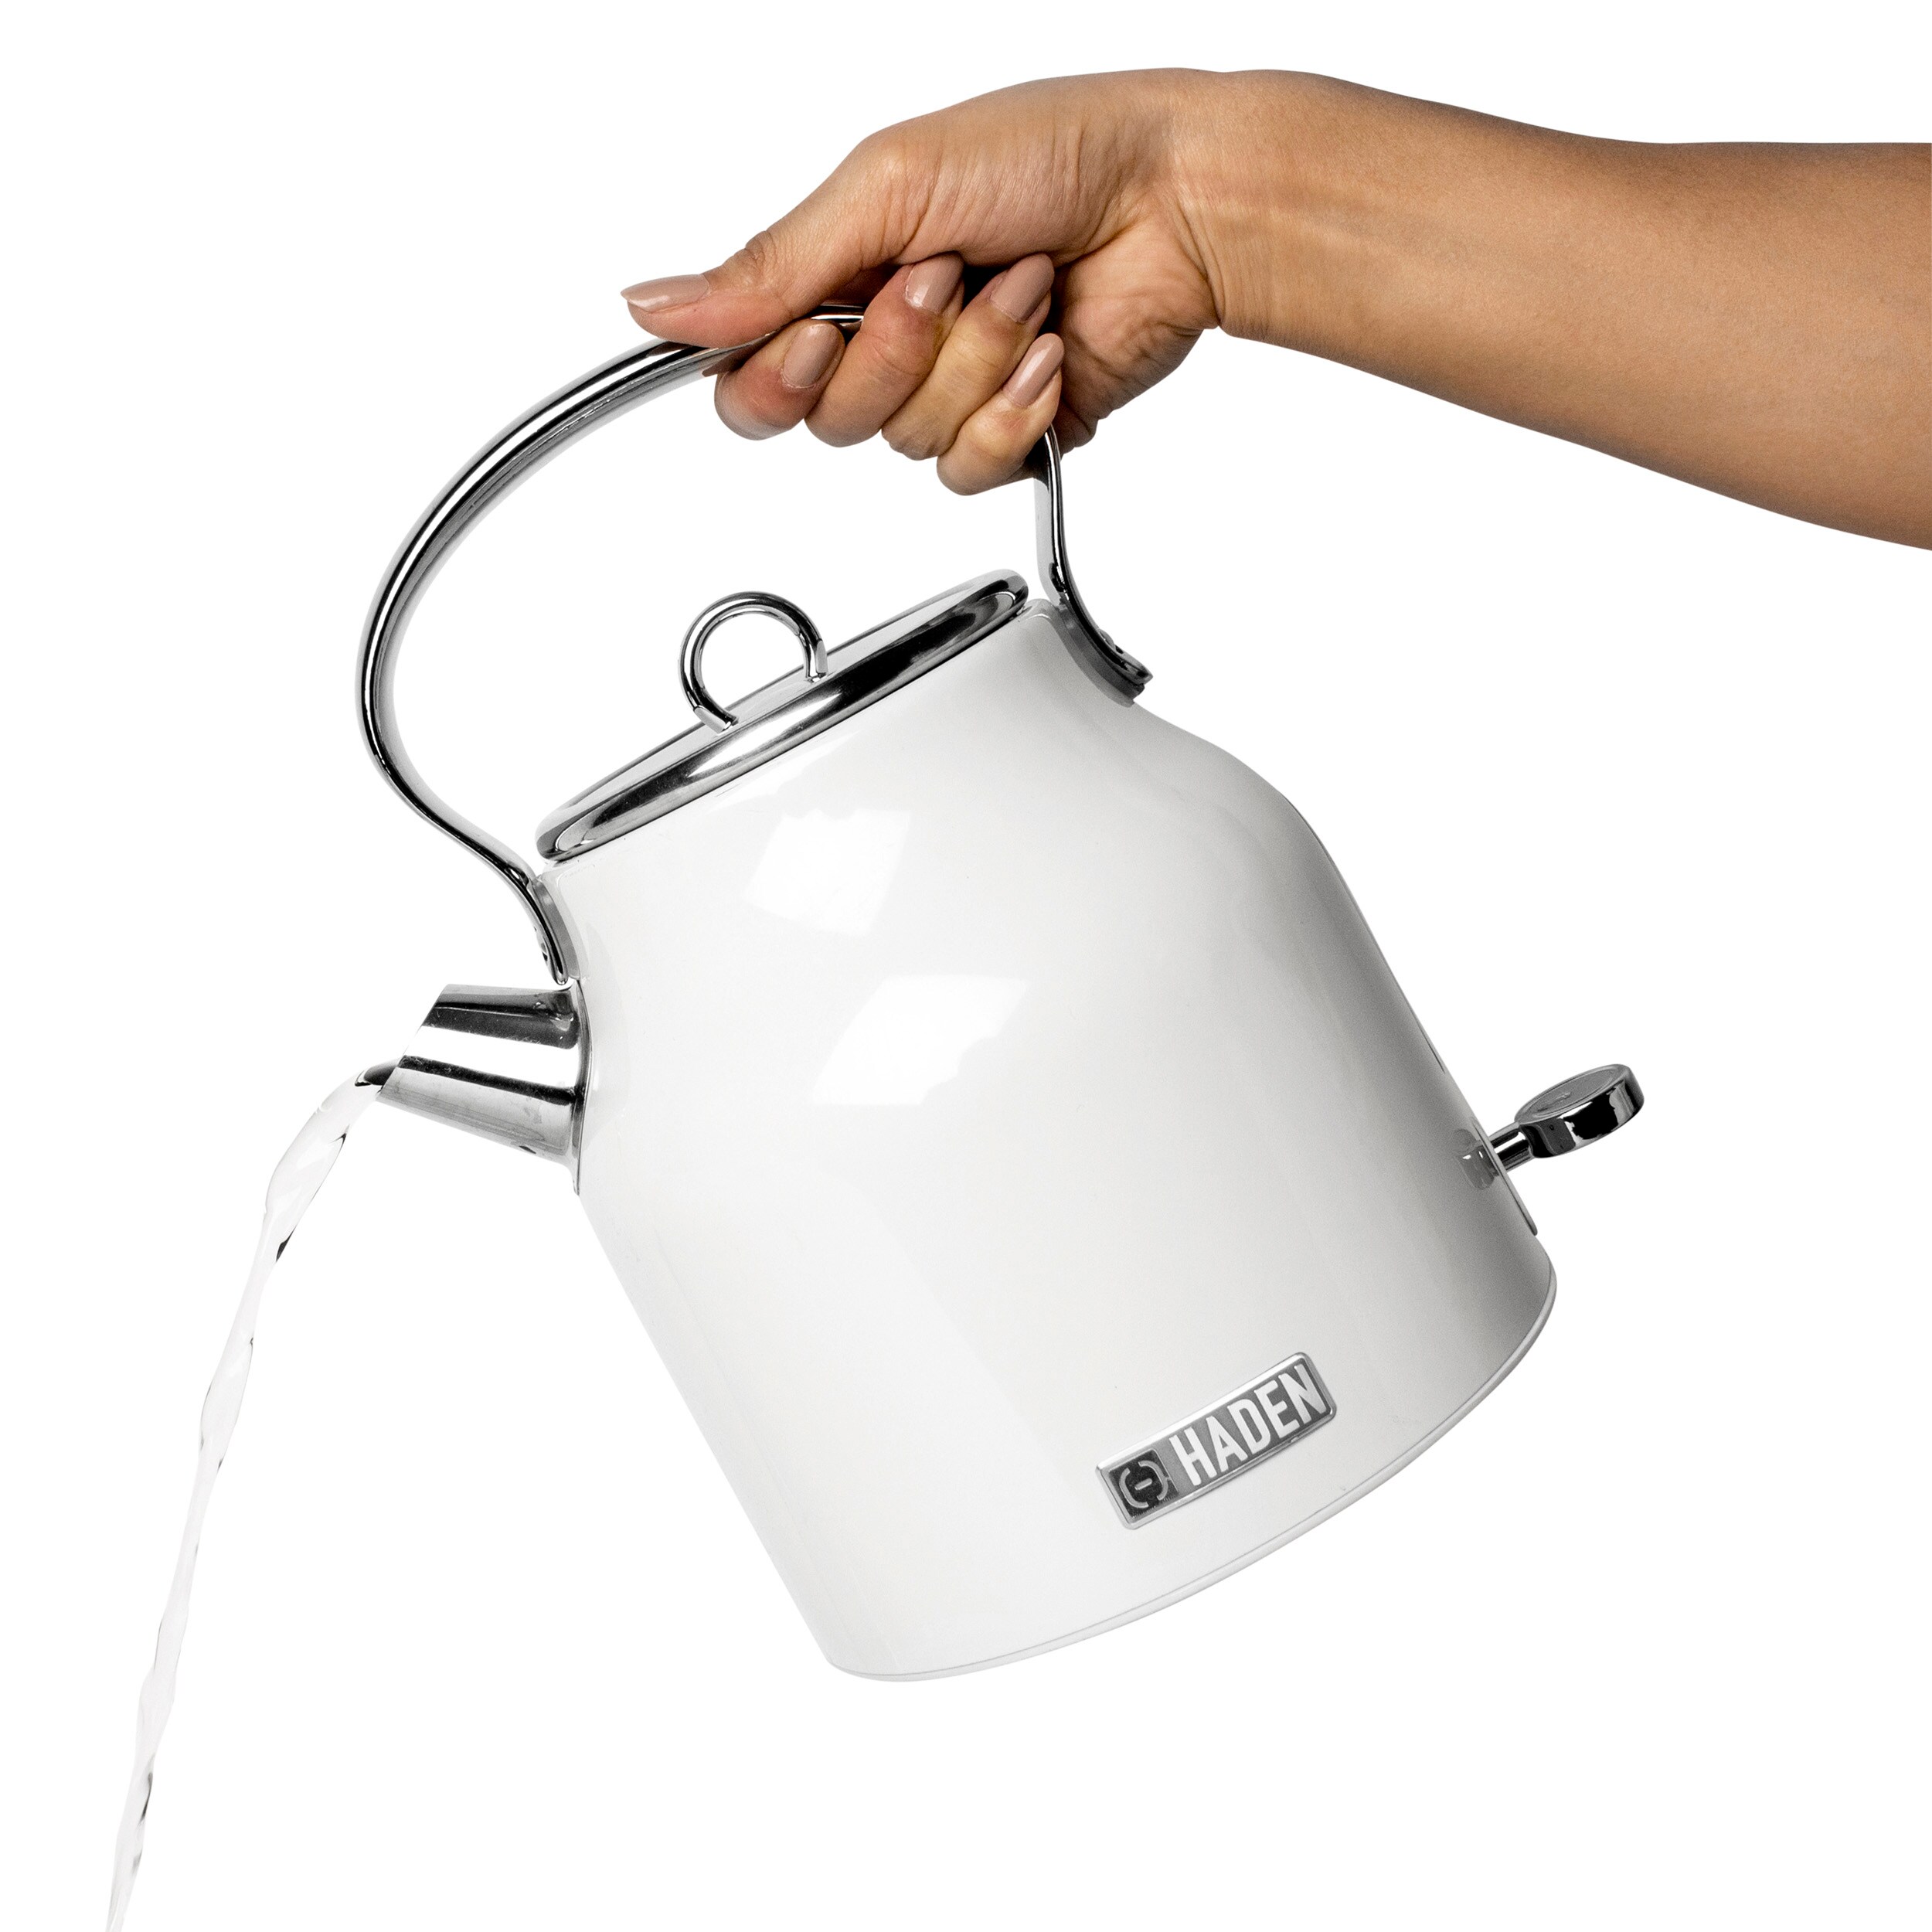 Haden Heritage 1.7 L Stainless Steel Body Electric Kettle w